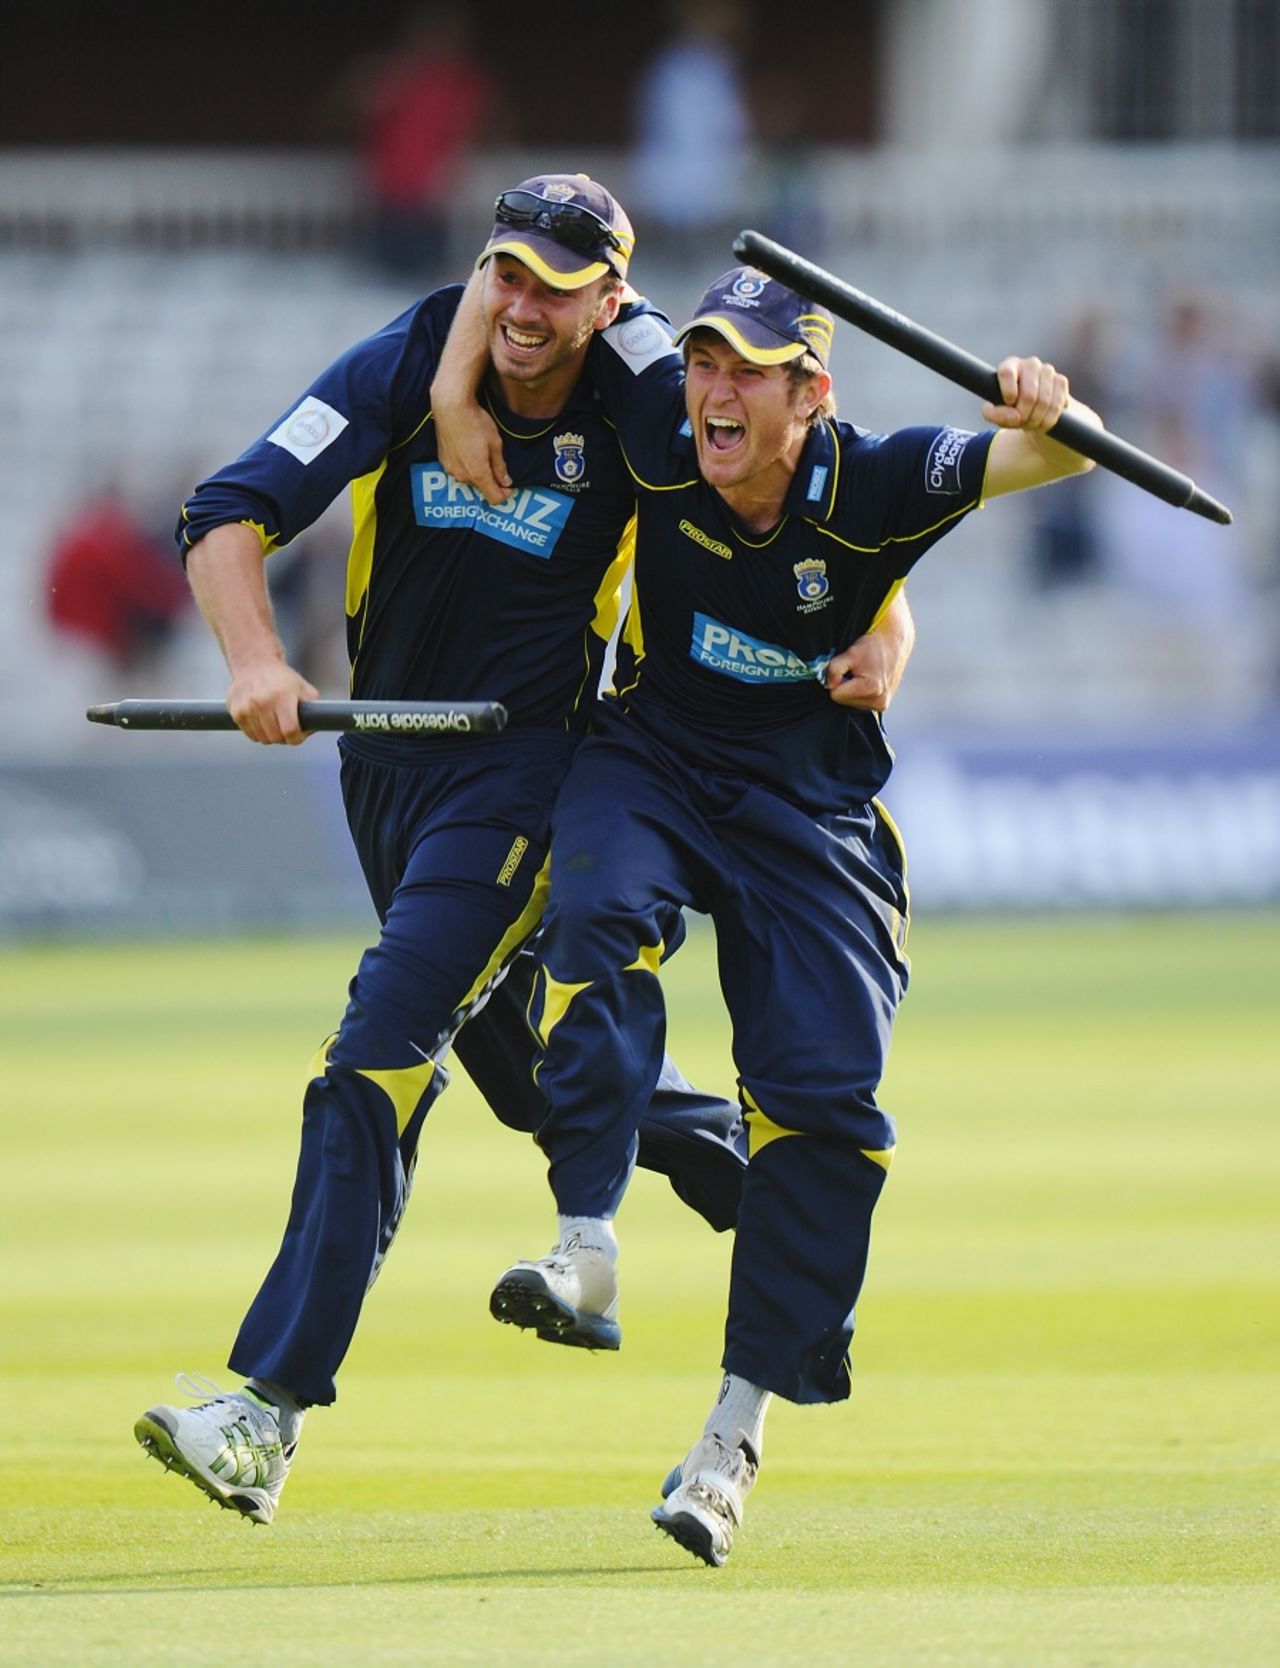 James Vince and Liam Dawson grab a stump each in celebration, Hampshire v Warwickshire, CB40 Final, Lord's, September 15, 2012